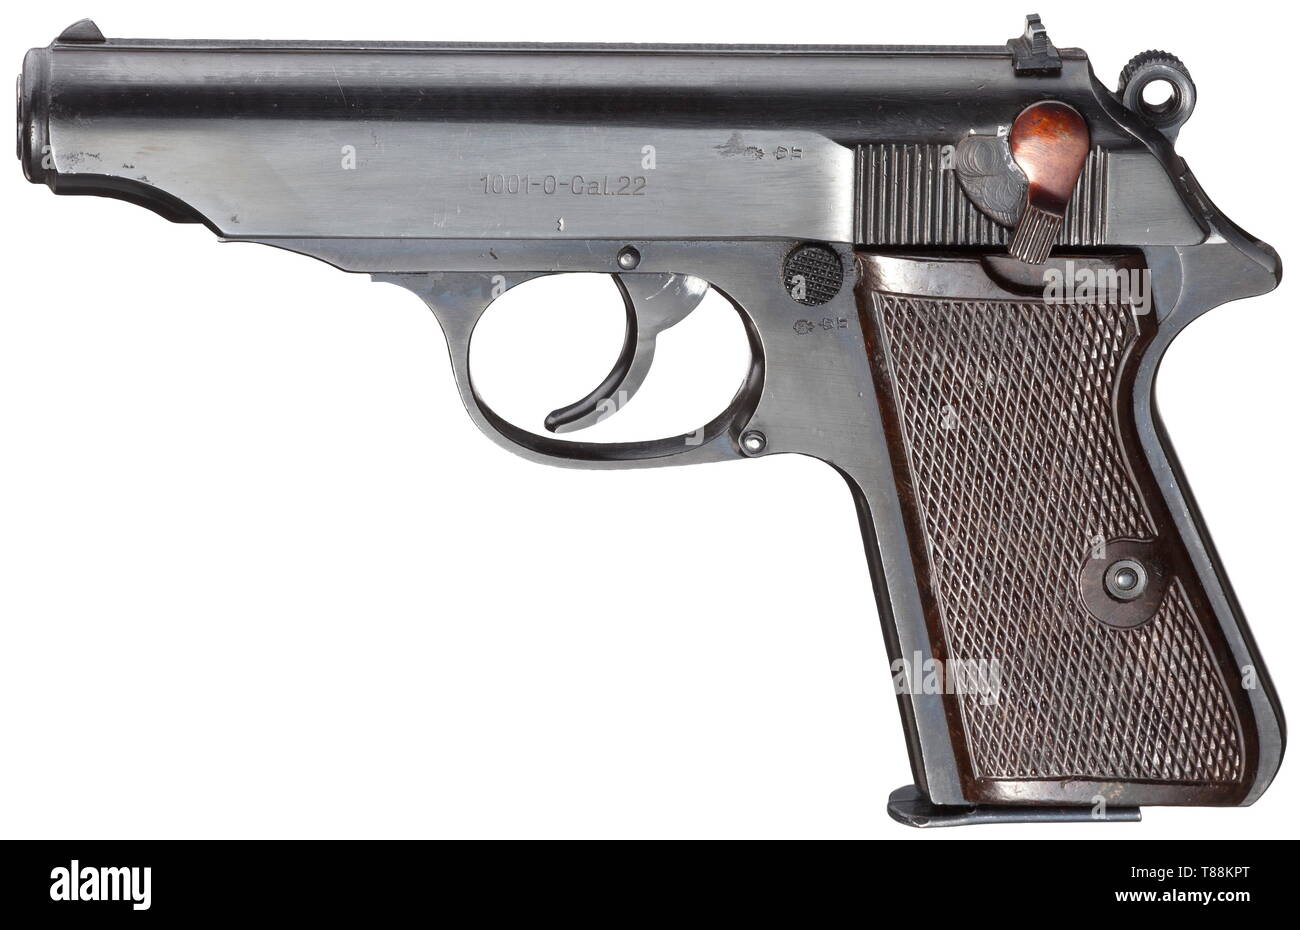 Small arms, pistols, Walther PP Pistol, caliber .22 lfB, East German police, Additional-Rights-Clearance-Info-Not-Available Stock Photo